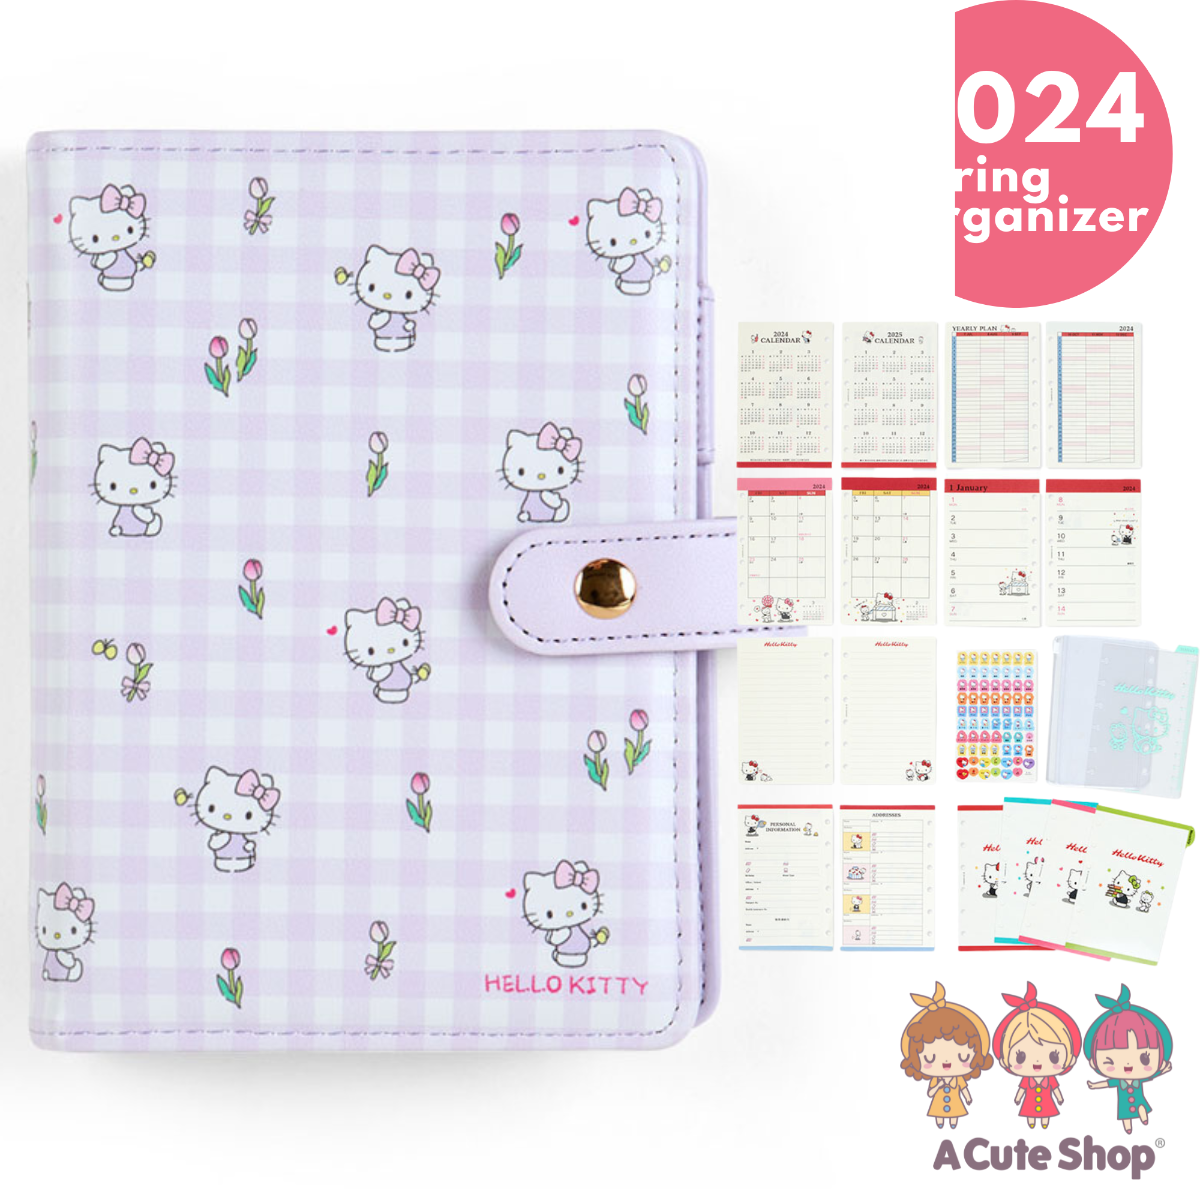 2023- 2024 Hello Kitty 6-Rings Personal Organizer Compact Planner Schedule Book Agenda PURPLE A Cute Shop - Inspired by You For The Cute Soul 